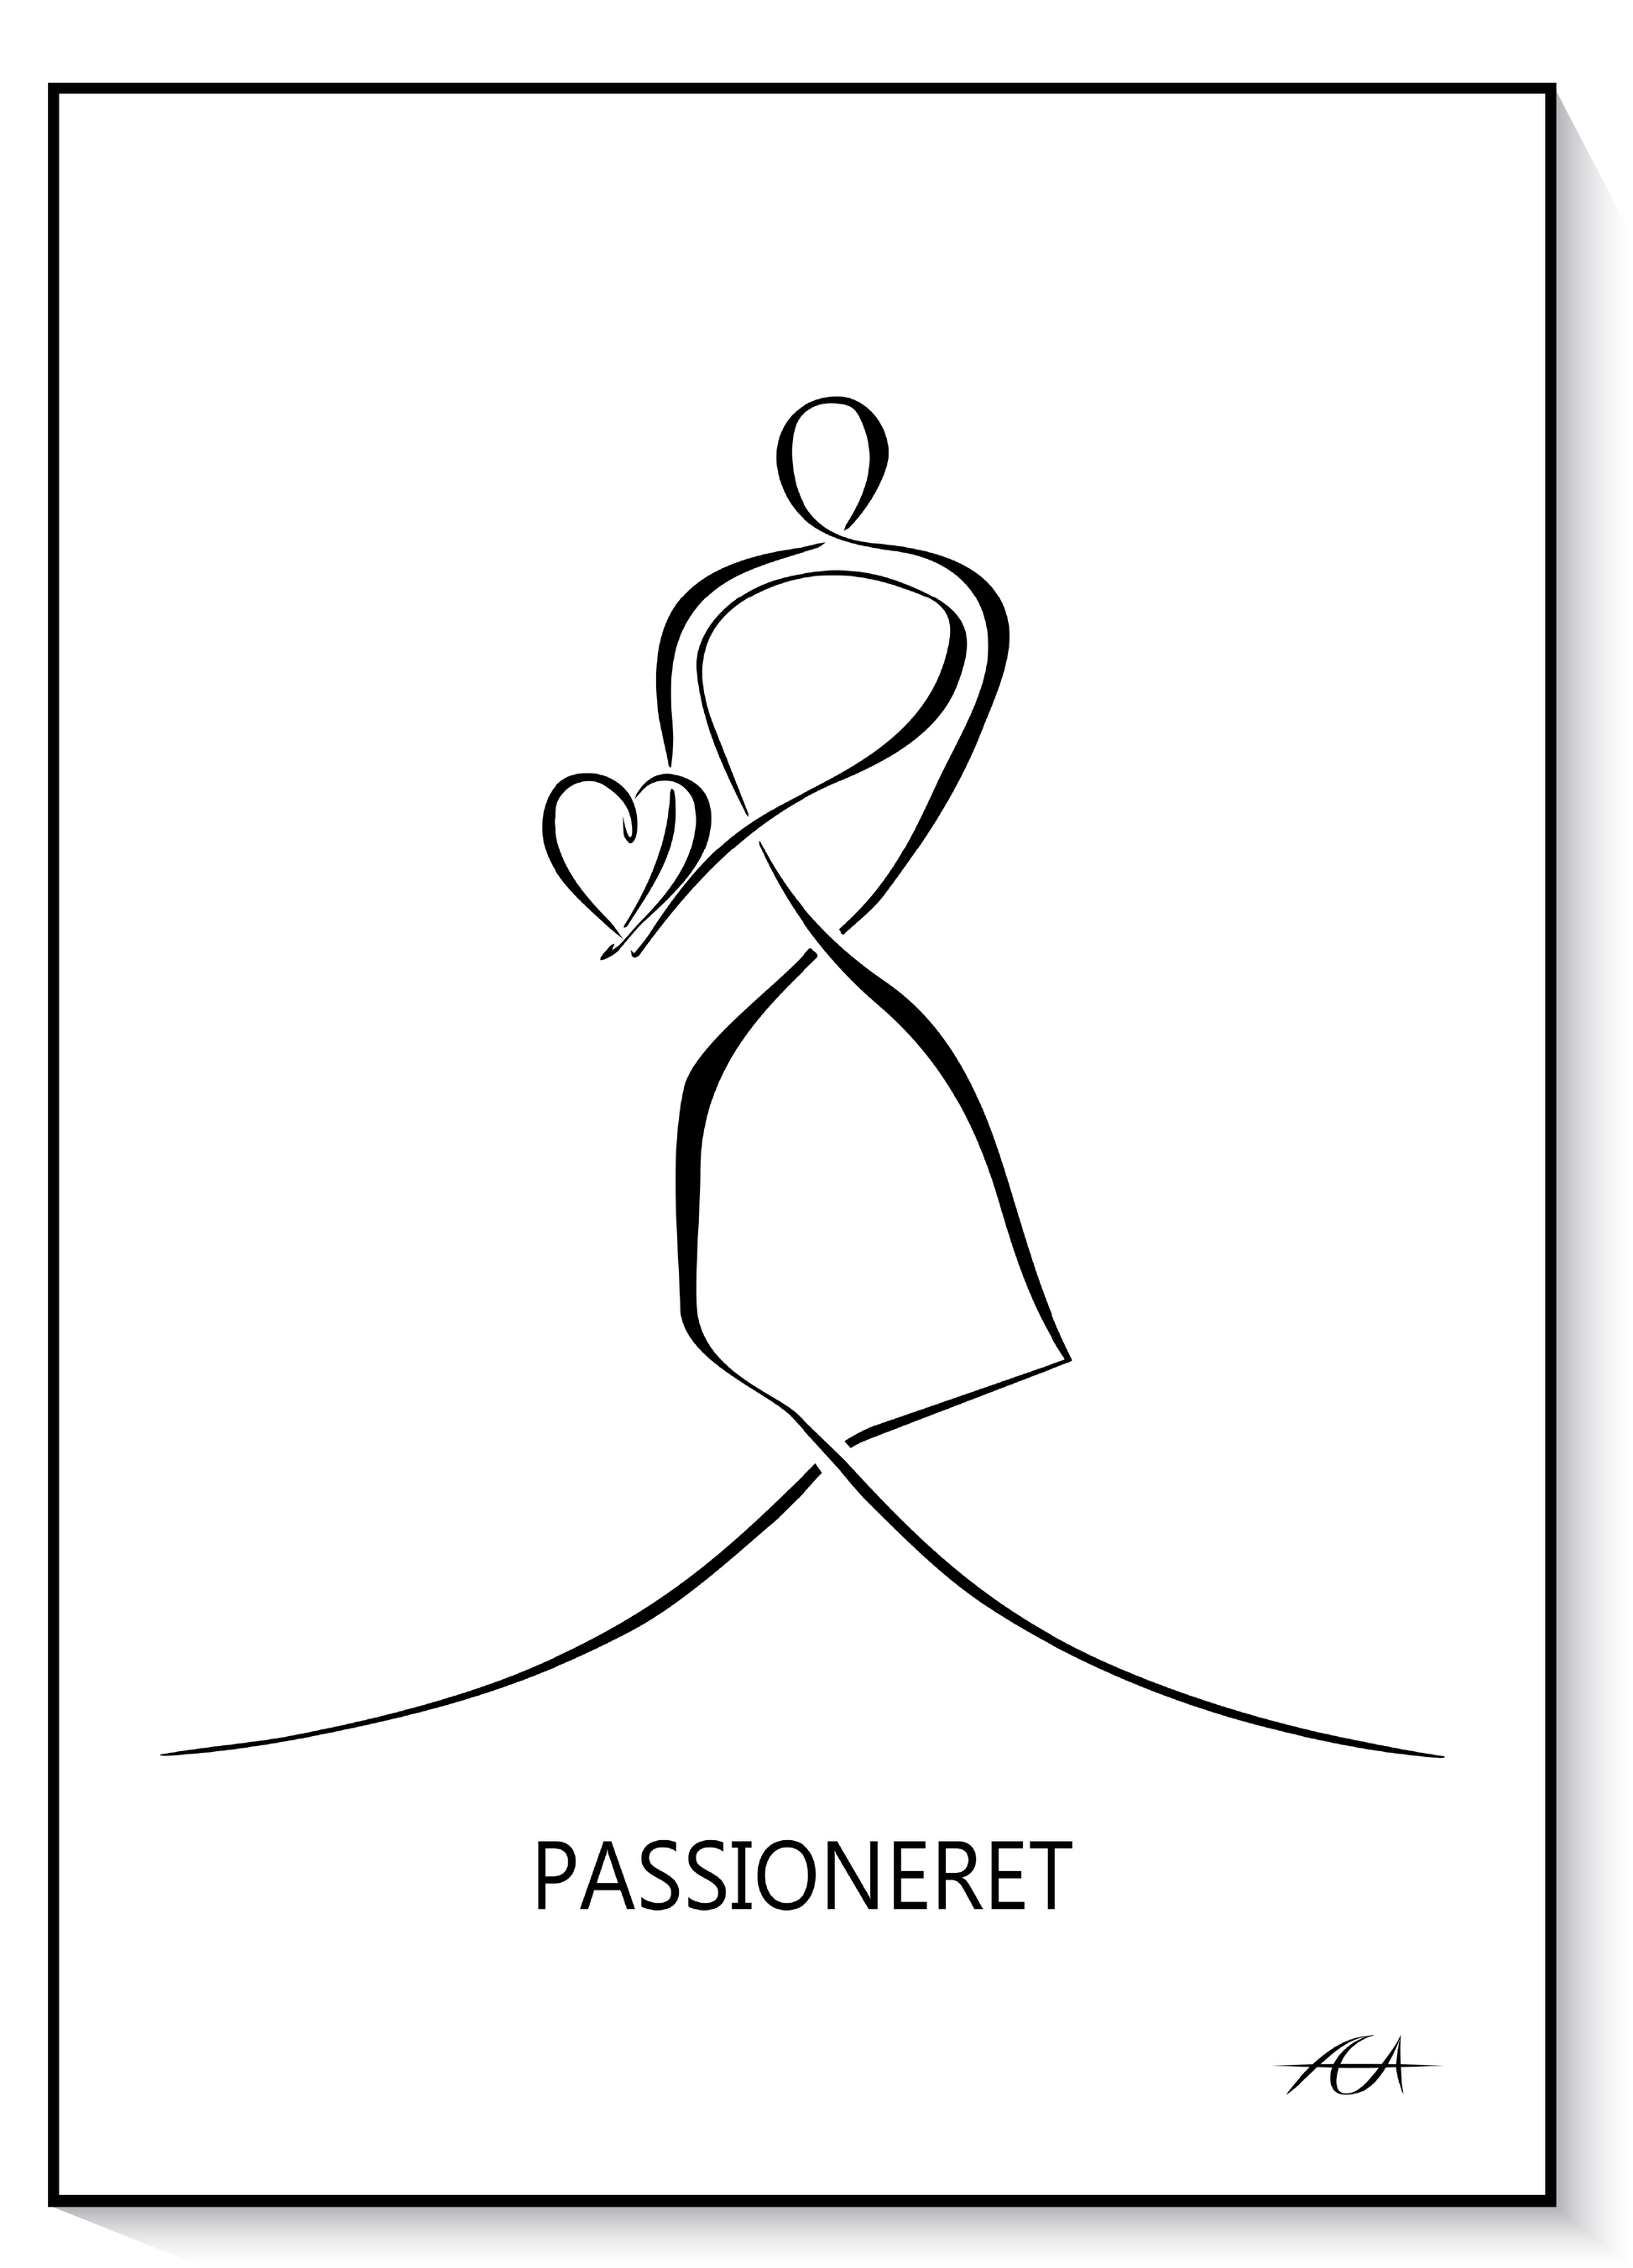 Passioneret - AEArt